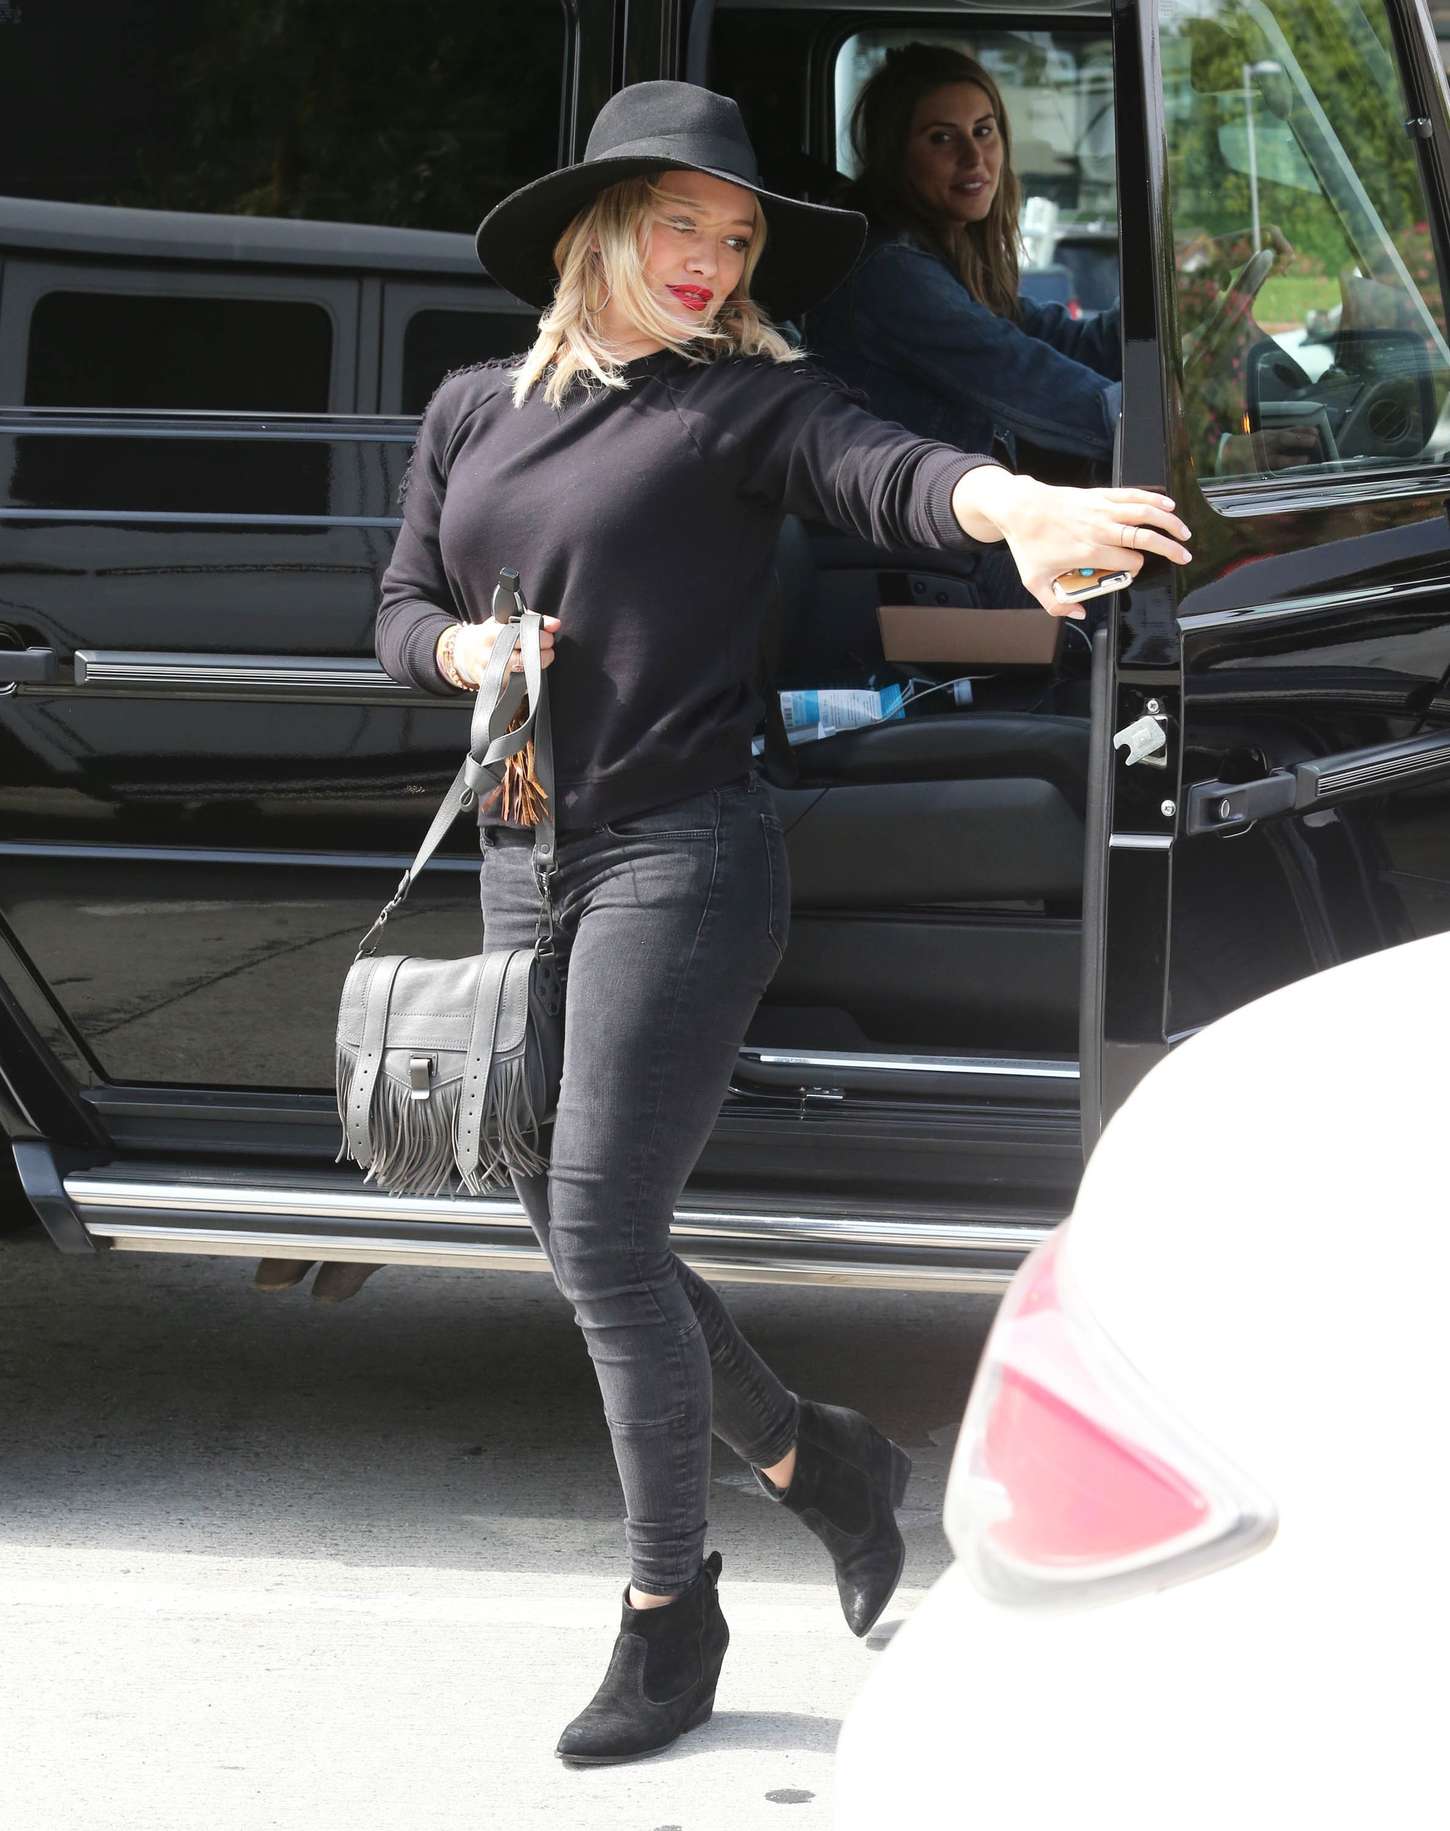 Hilary Duff 2015 : Hilary Duff in Tight Jeans and Hat -09. 